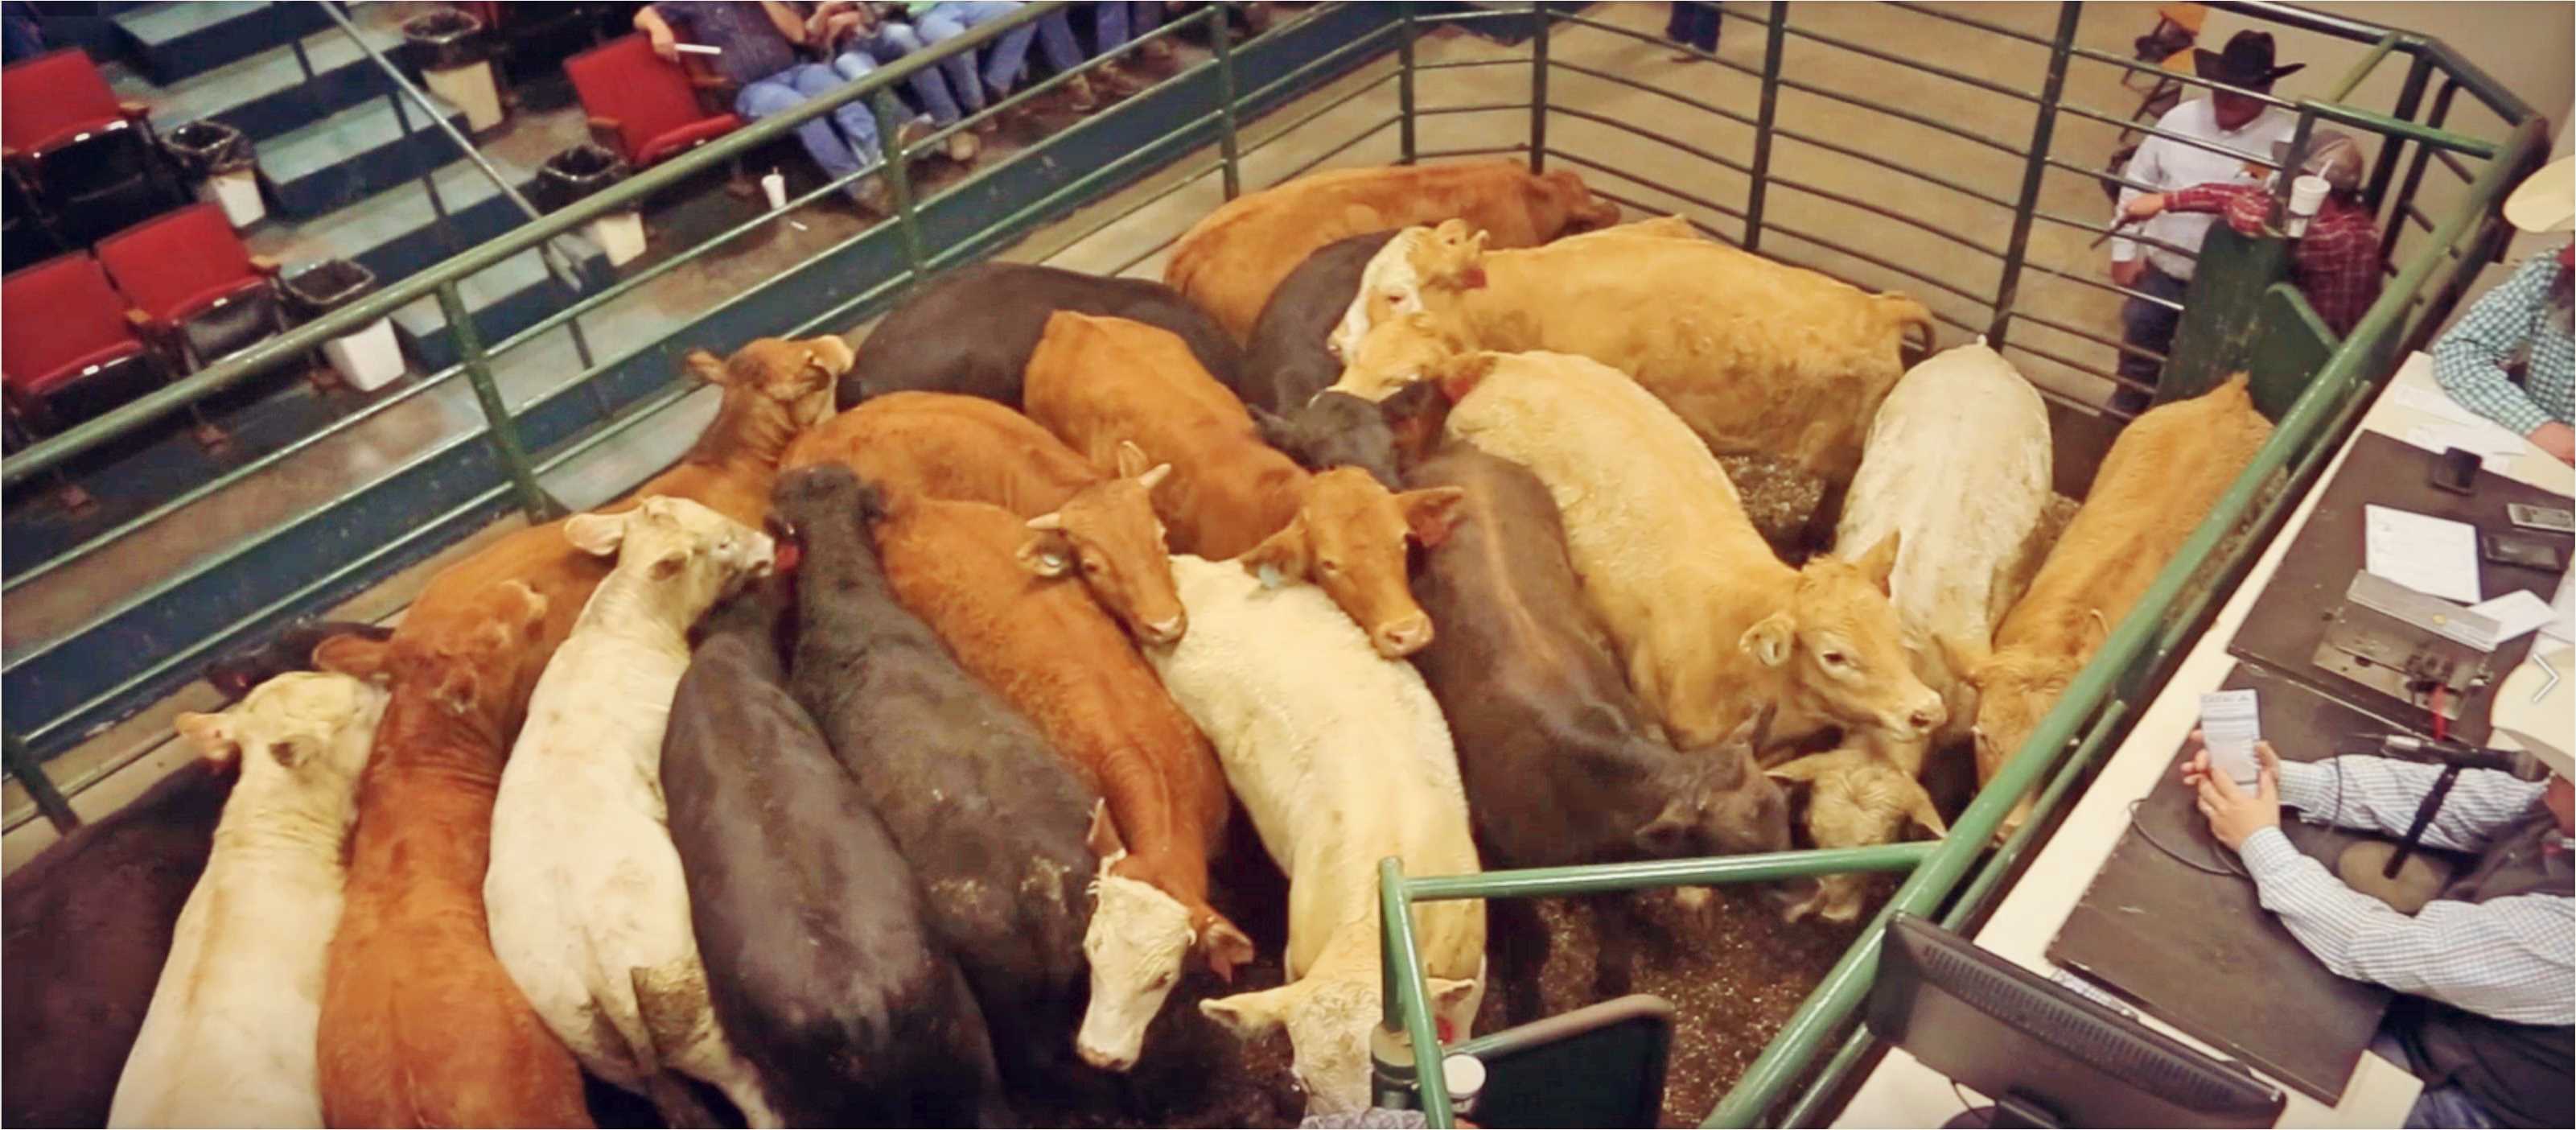 Day Of The Sale - Calves For Sale